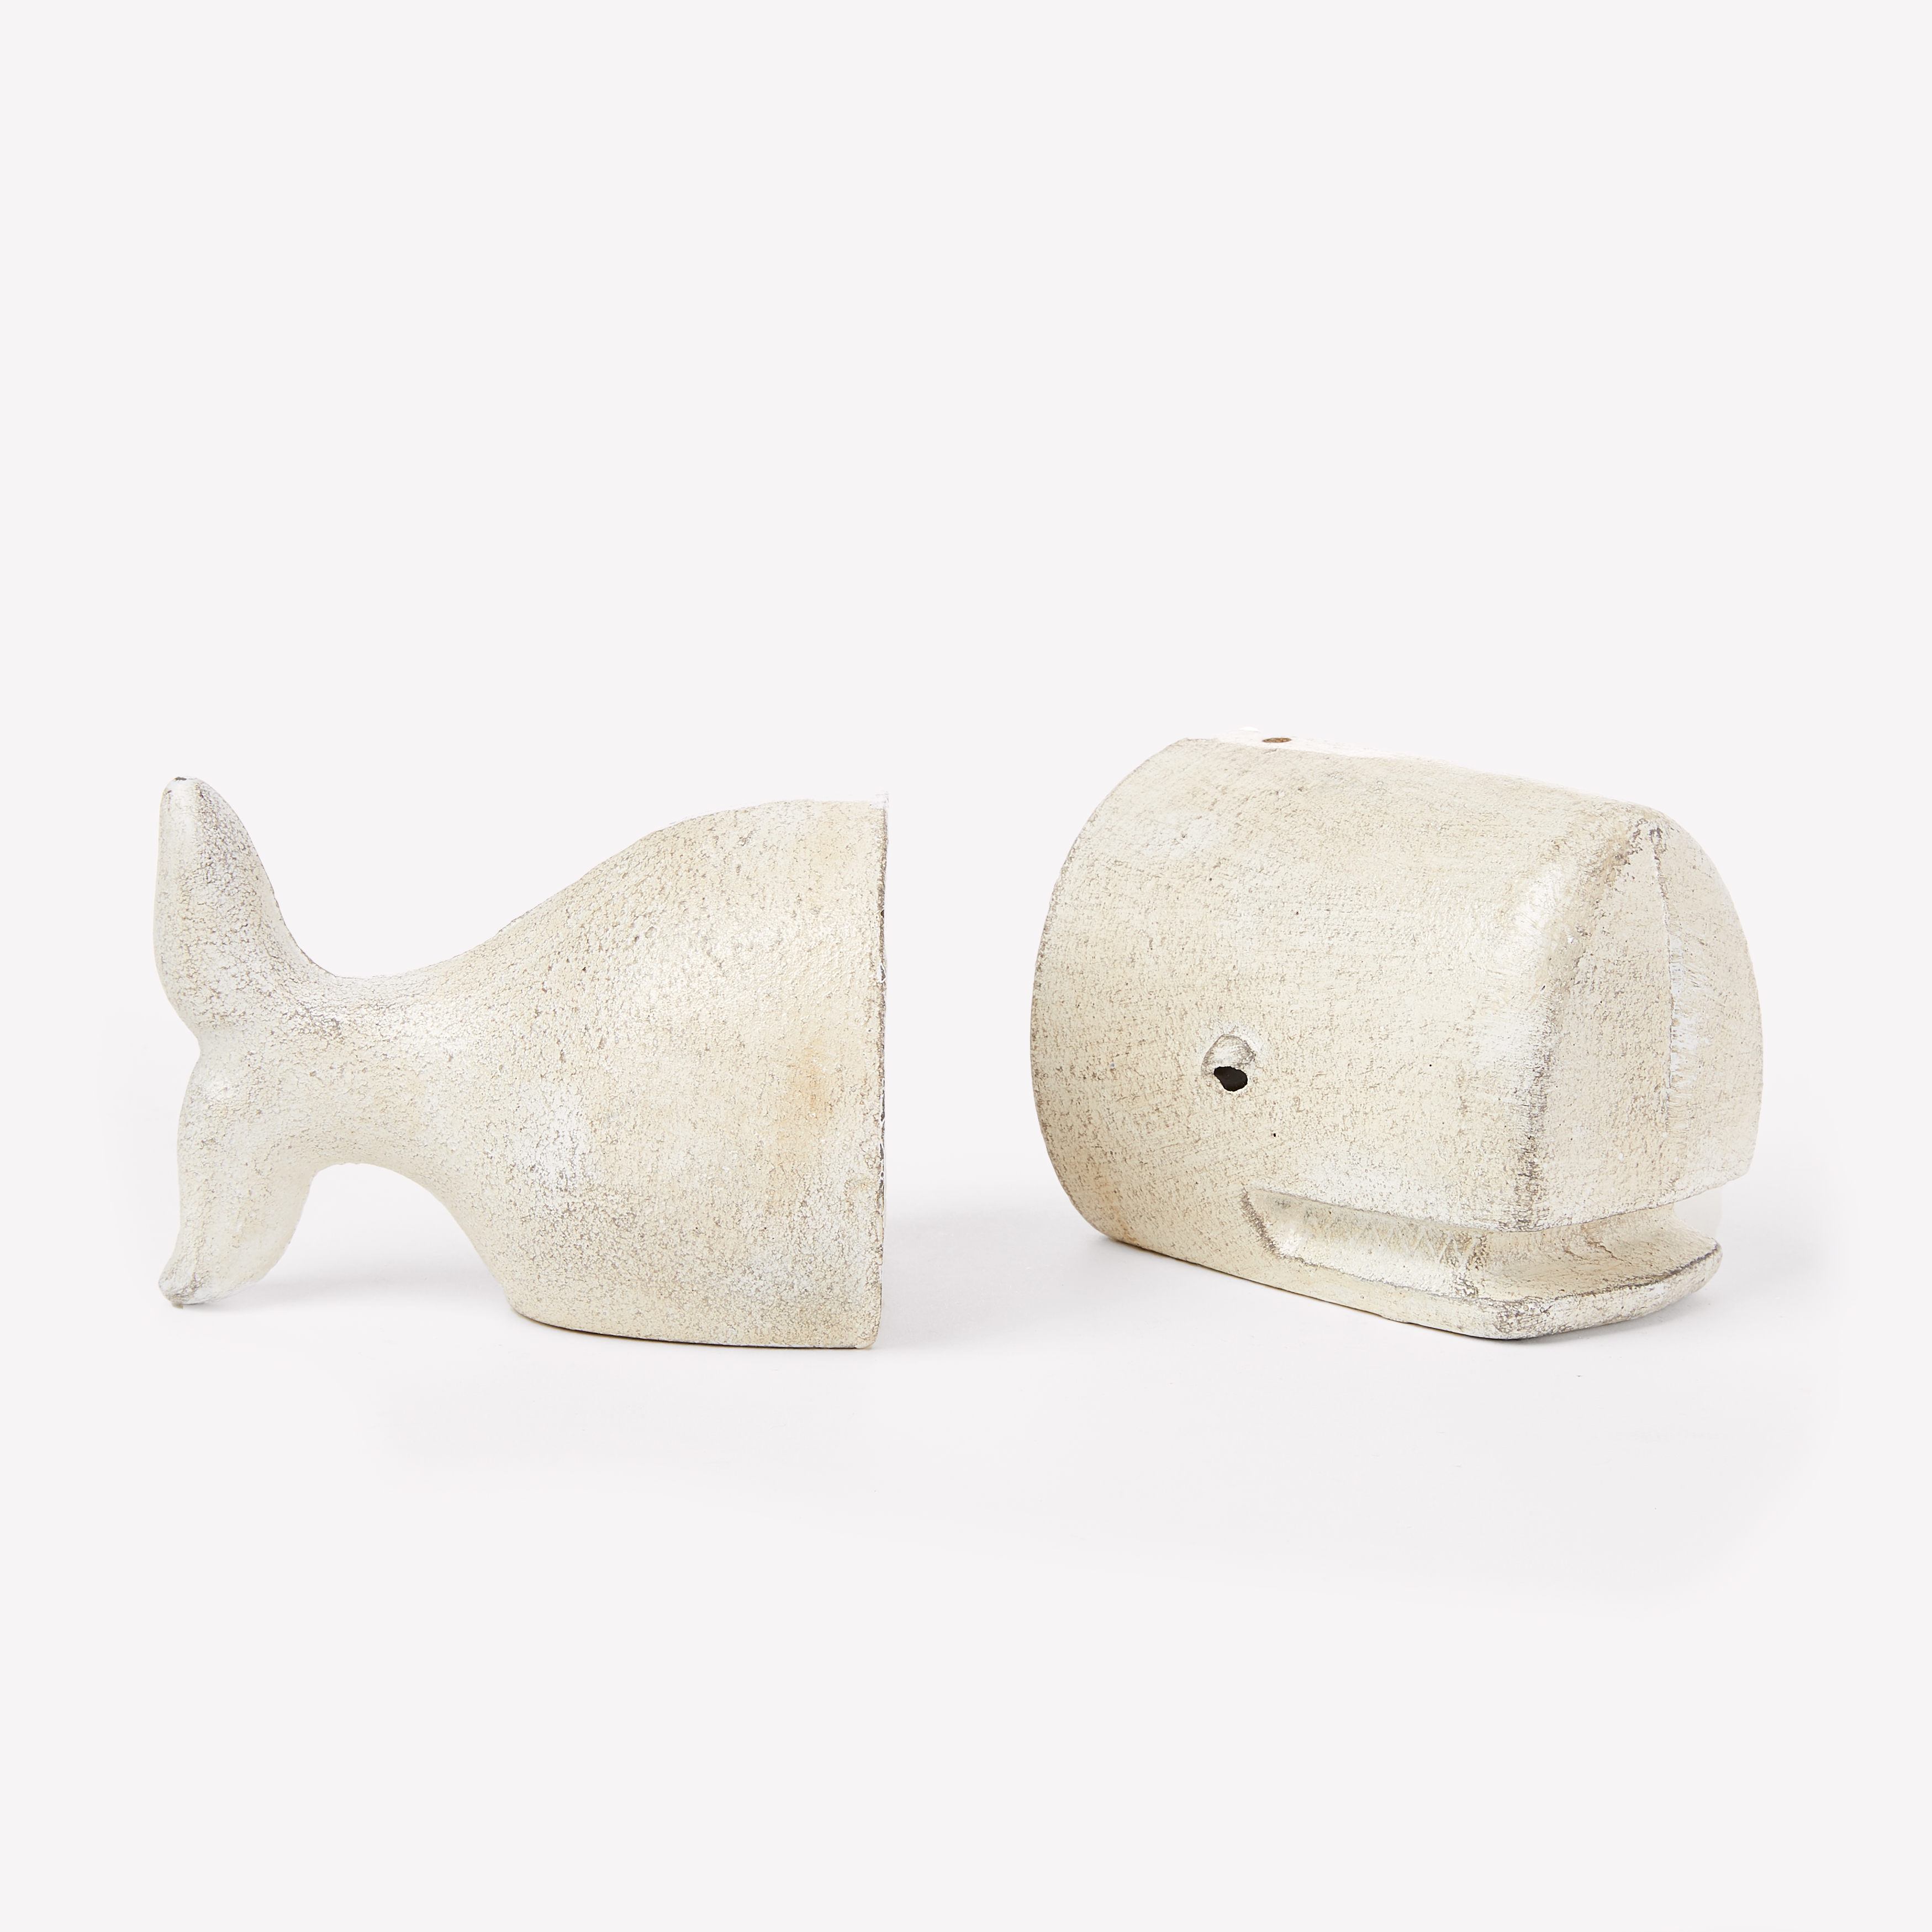 HomArt Cast Iron Whale Bookends, White | Bespoke Post